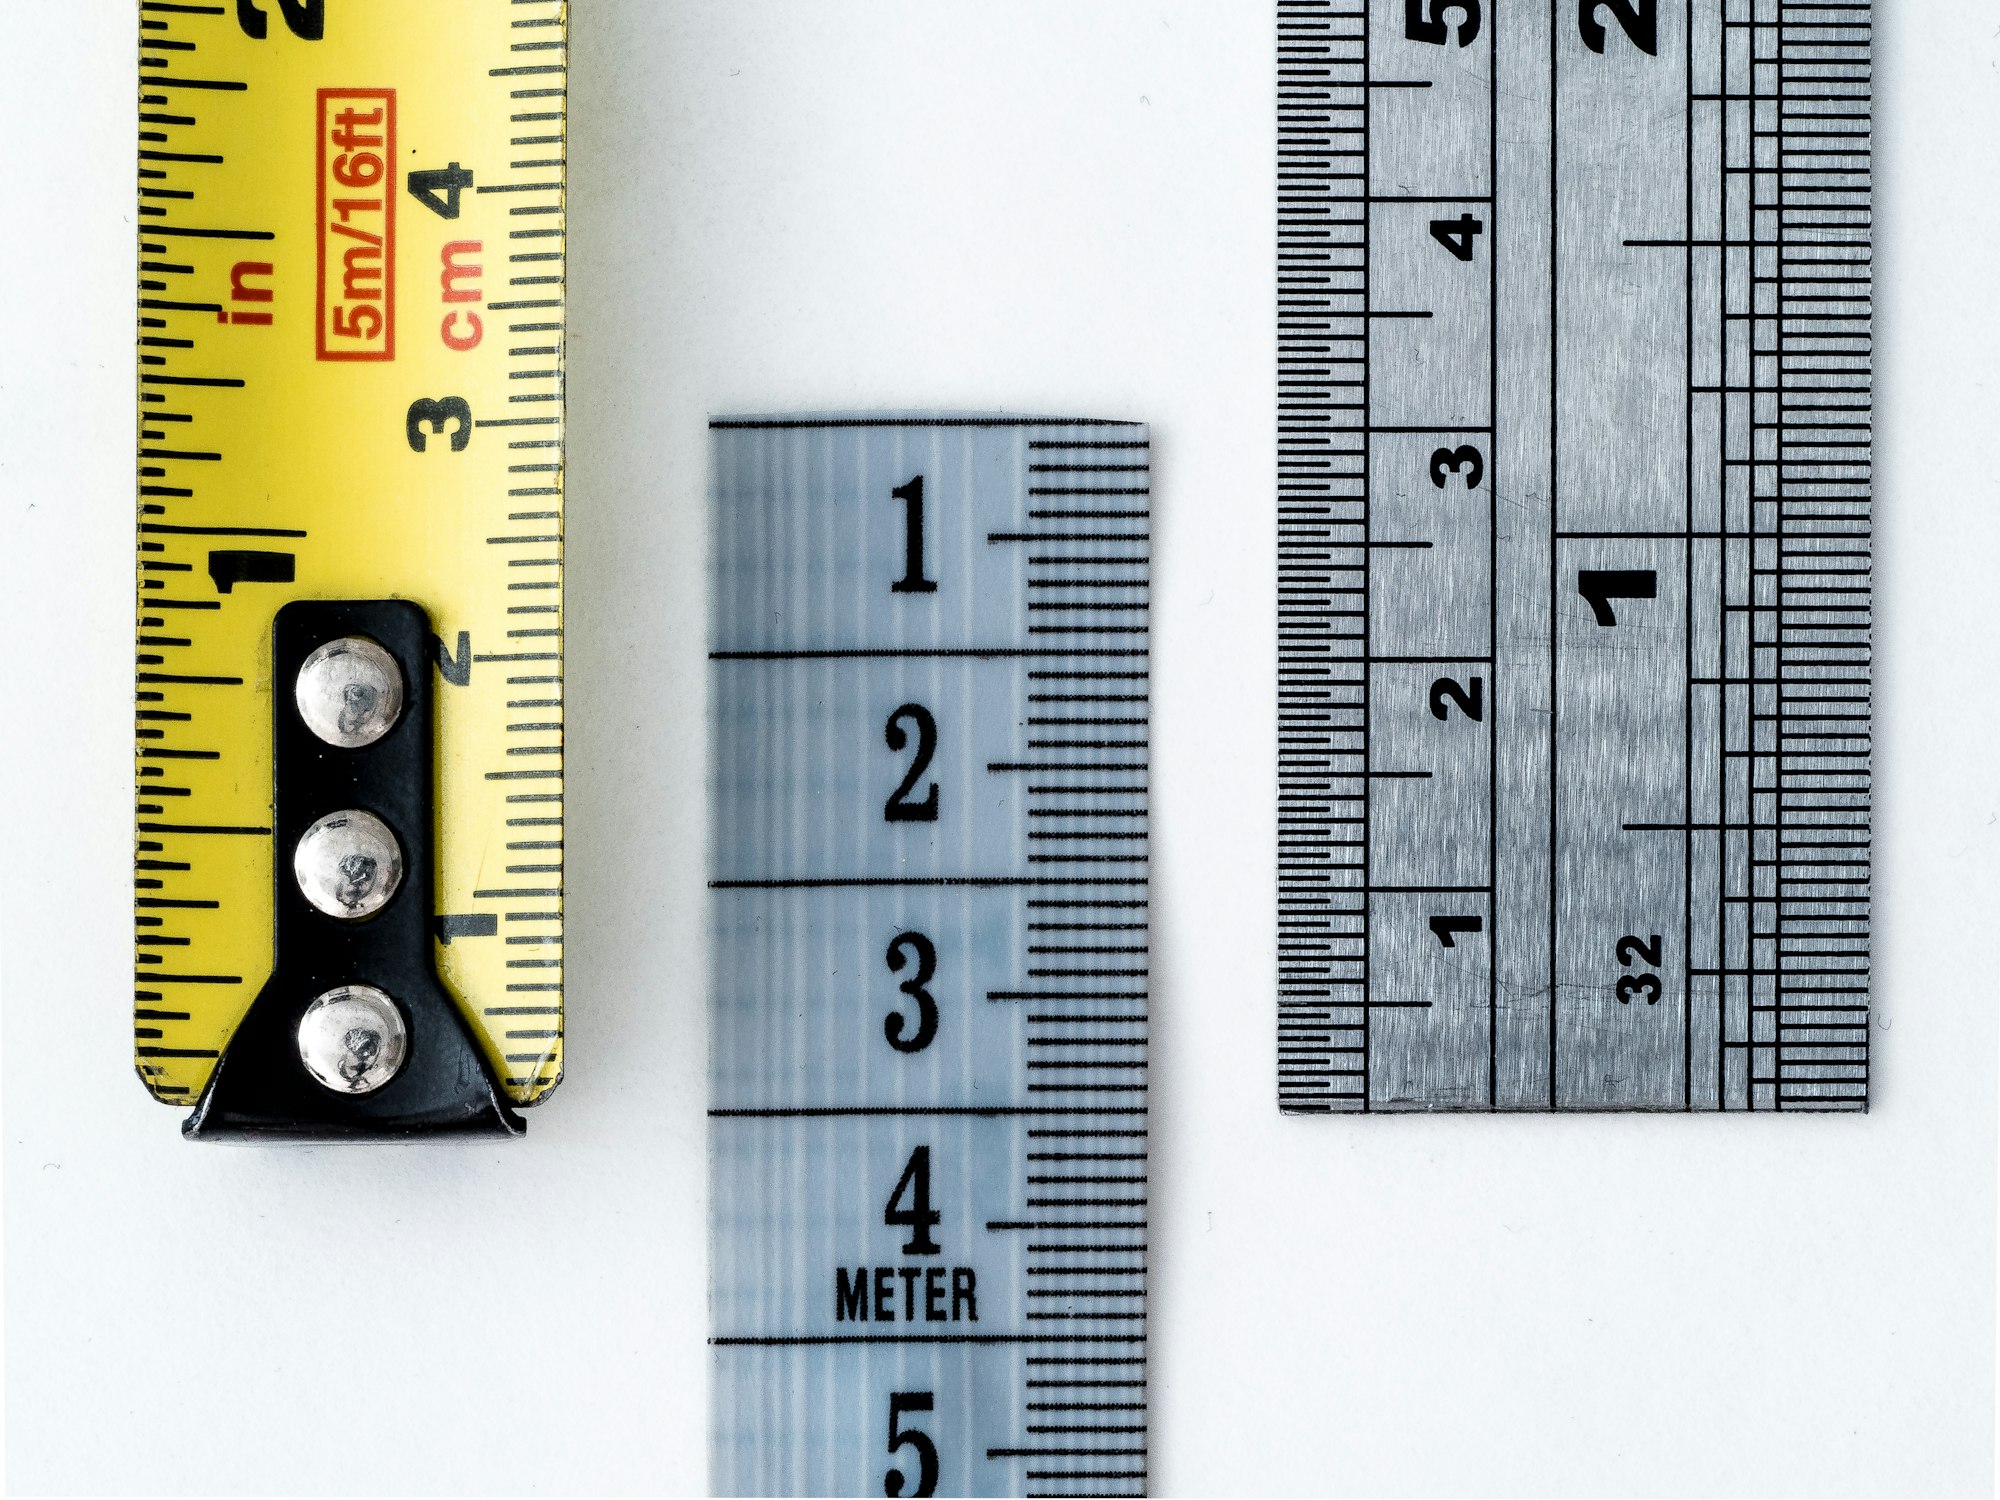 How to Measure Effectiveness